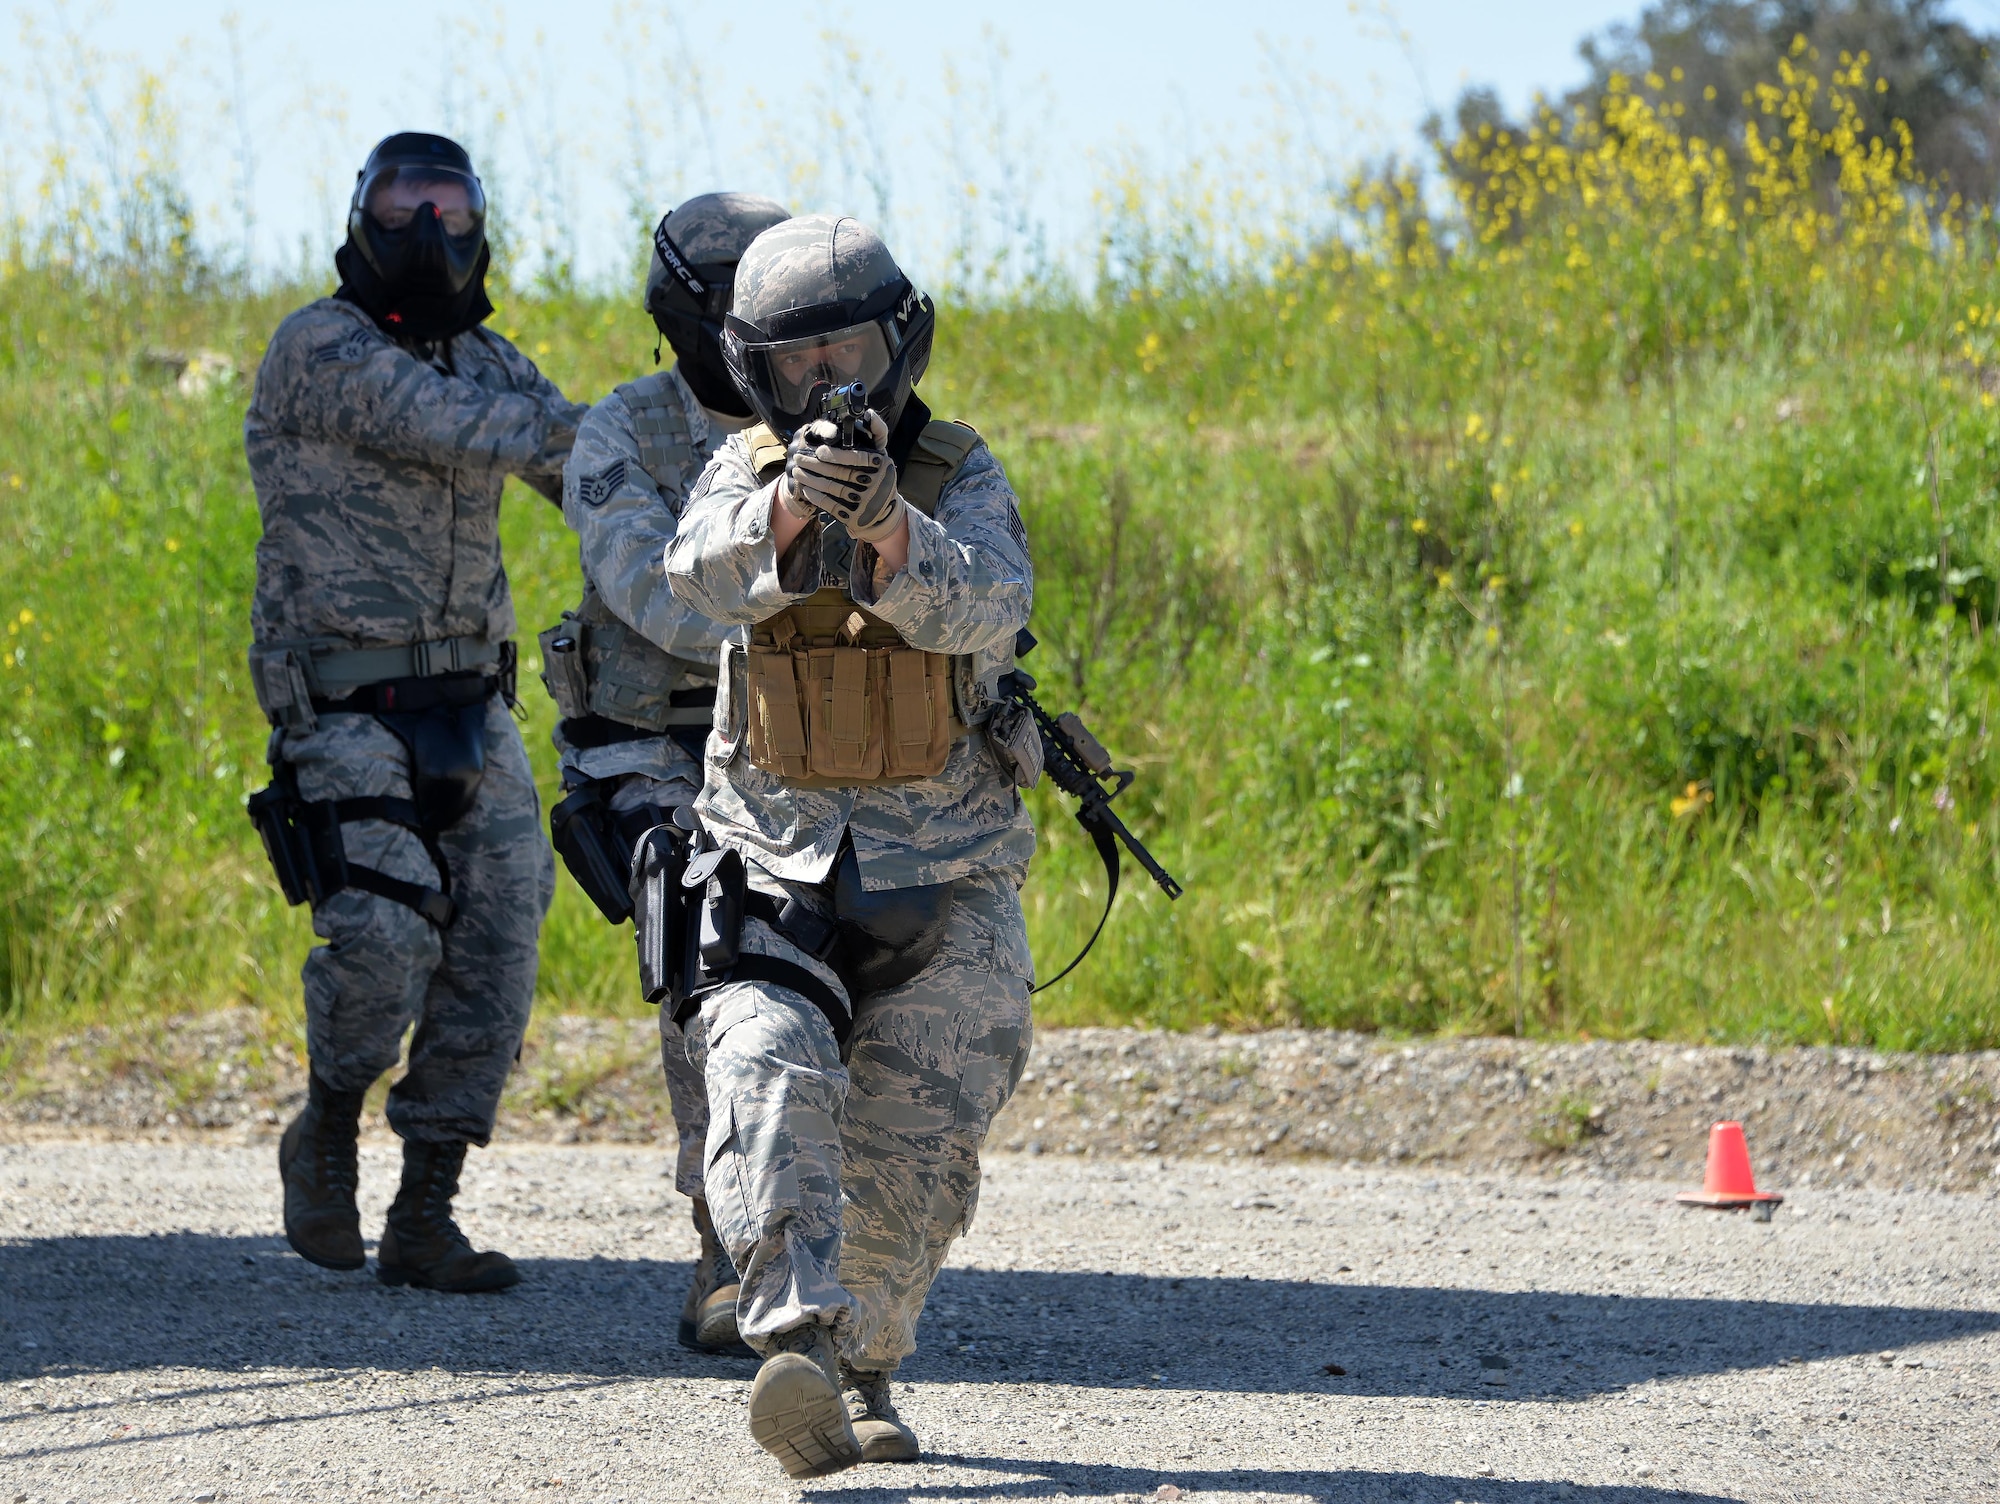 Tech. Sgt. Brooke Williams, the 60th Security Forces Squadron’s Raven program manager, runs as the point person on a security team responding to a simulated active shooter event April 13, 2016, at Travis Air Force Base, Calif. As a Phoenix Raven, Williams provides close-in security for Air Mobility Command aircraft transiting airfields where security is unknown or additional security is needed to counter local threats. (U.S. Air Force photo/Staff Sgt. Charles Rivezzo)